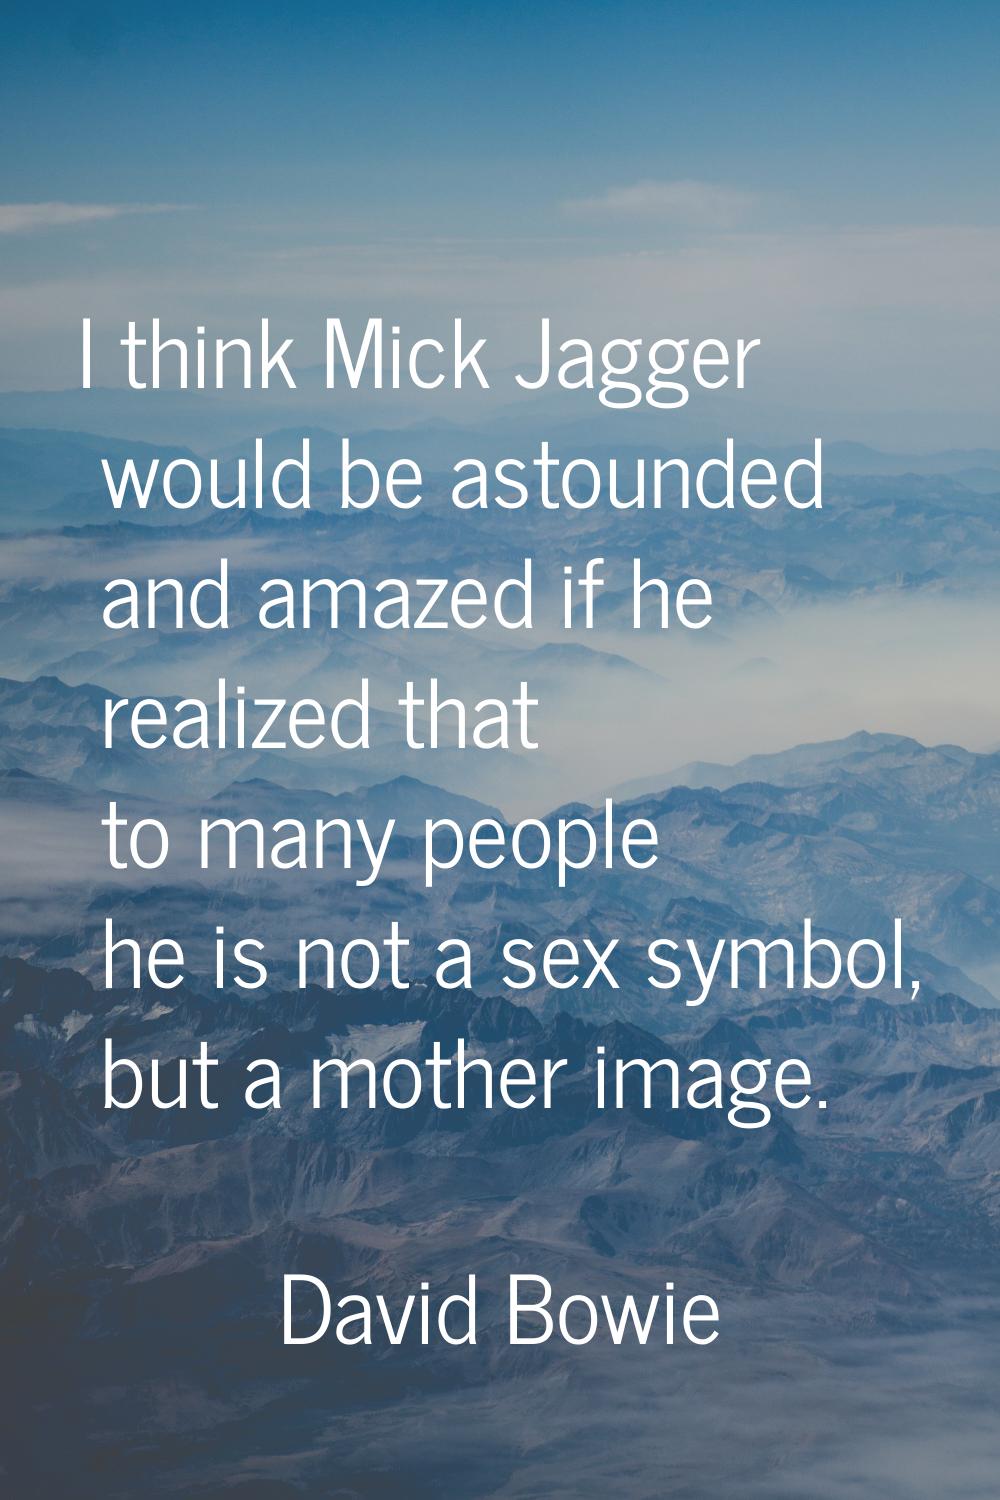 I think Mick Jagger would be astounded and amazed if he realized that to many people he is not a se